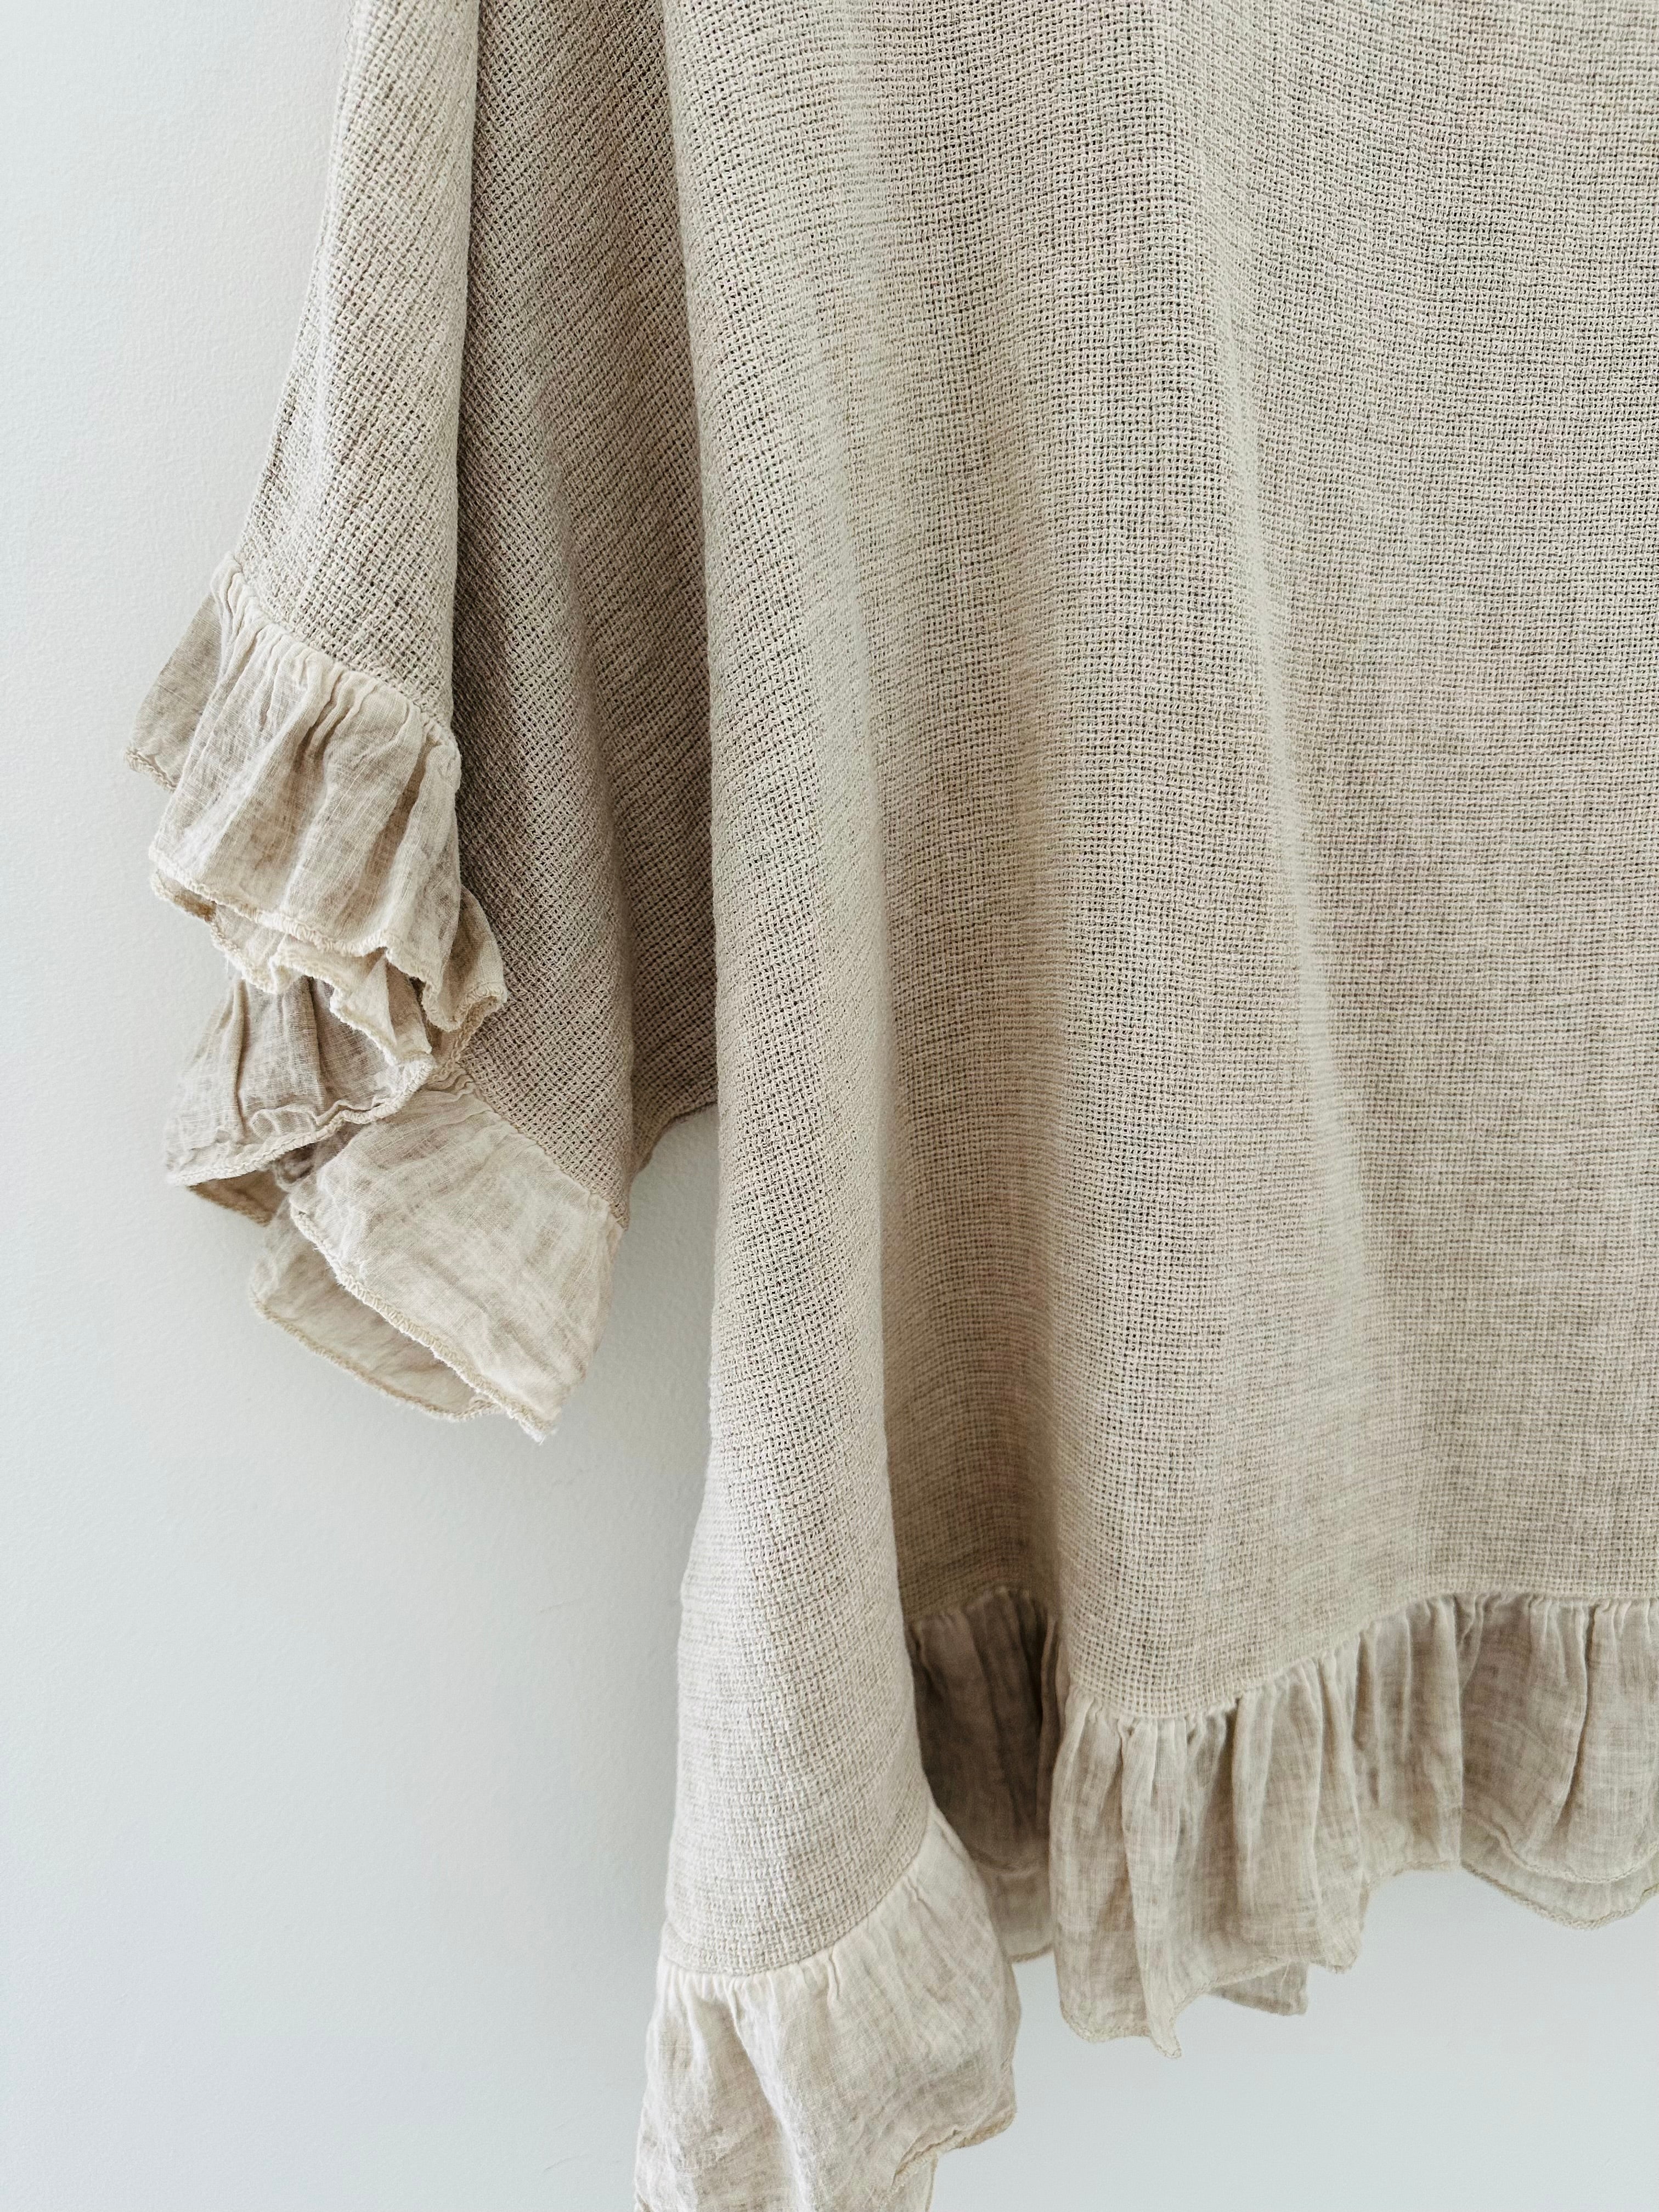 Linen & Cotton Top in Stone